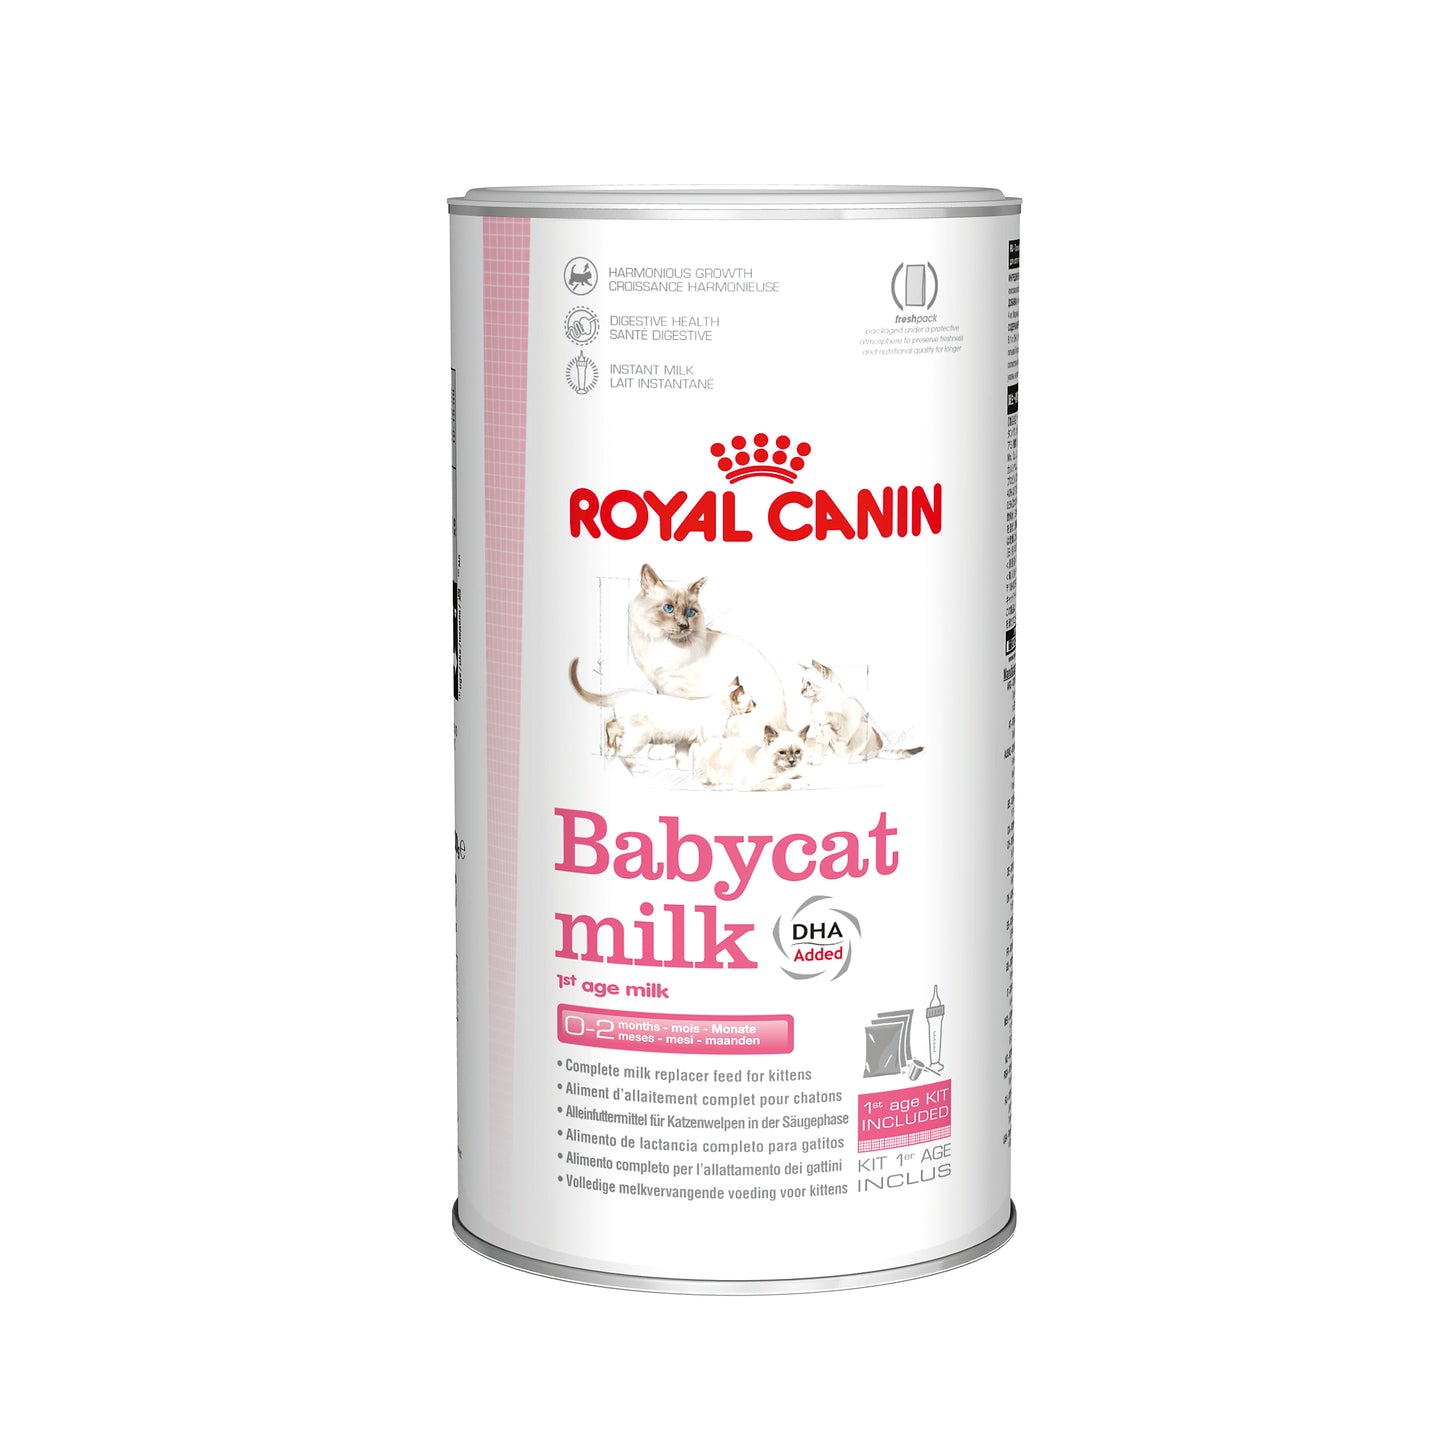 Royal Canin® Feline Health Nutrition™ Babycat Milk- Milk Replacer for Kittens  Cat Food  | PetMax Canada